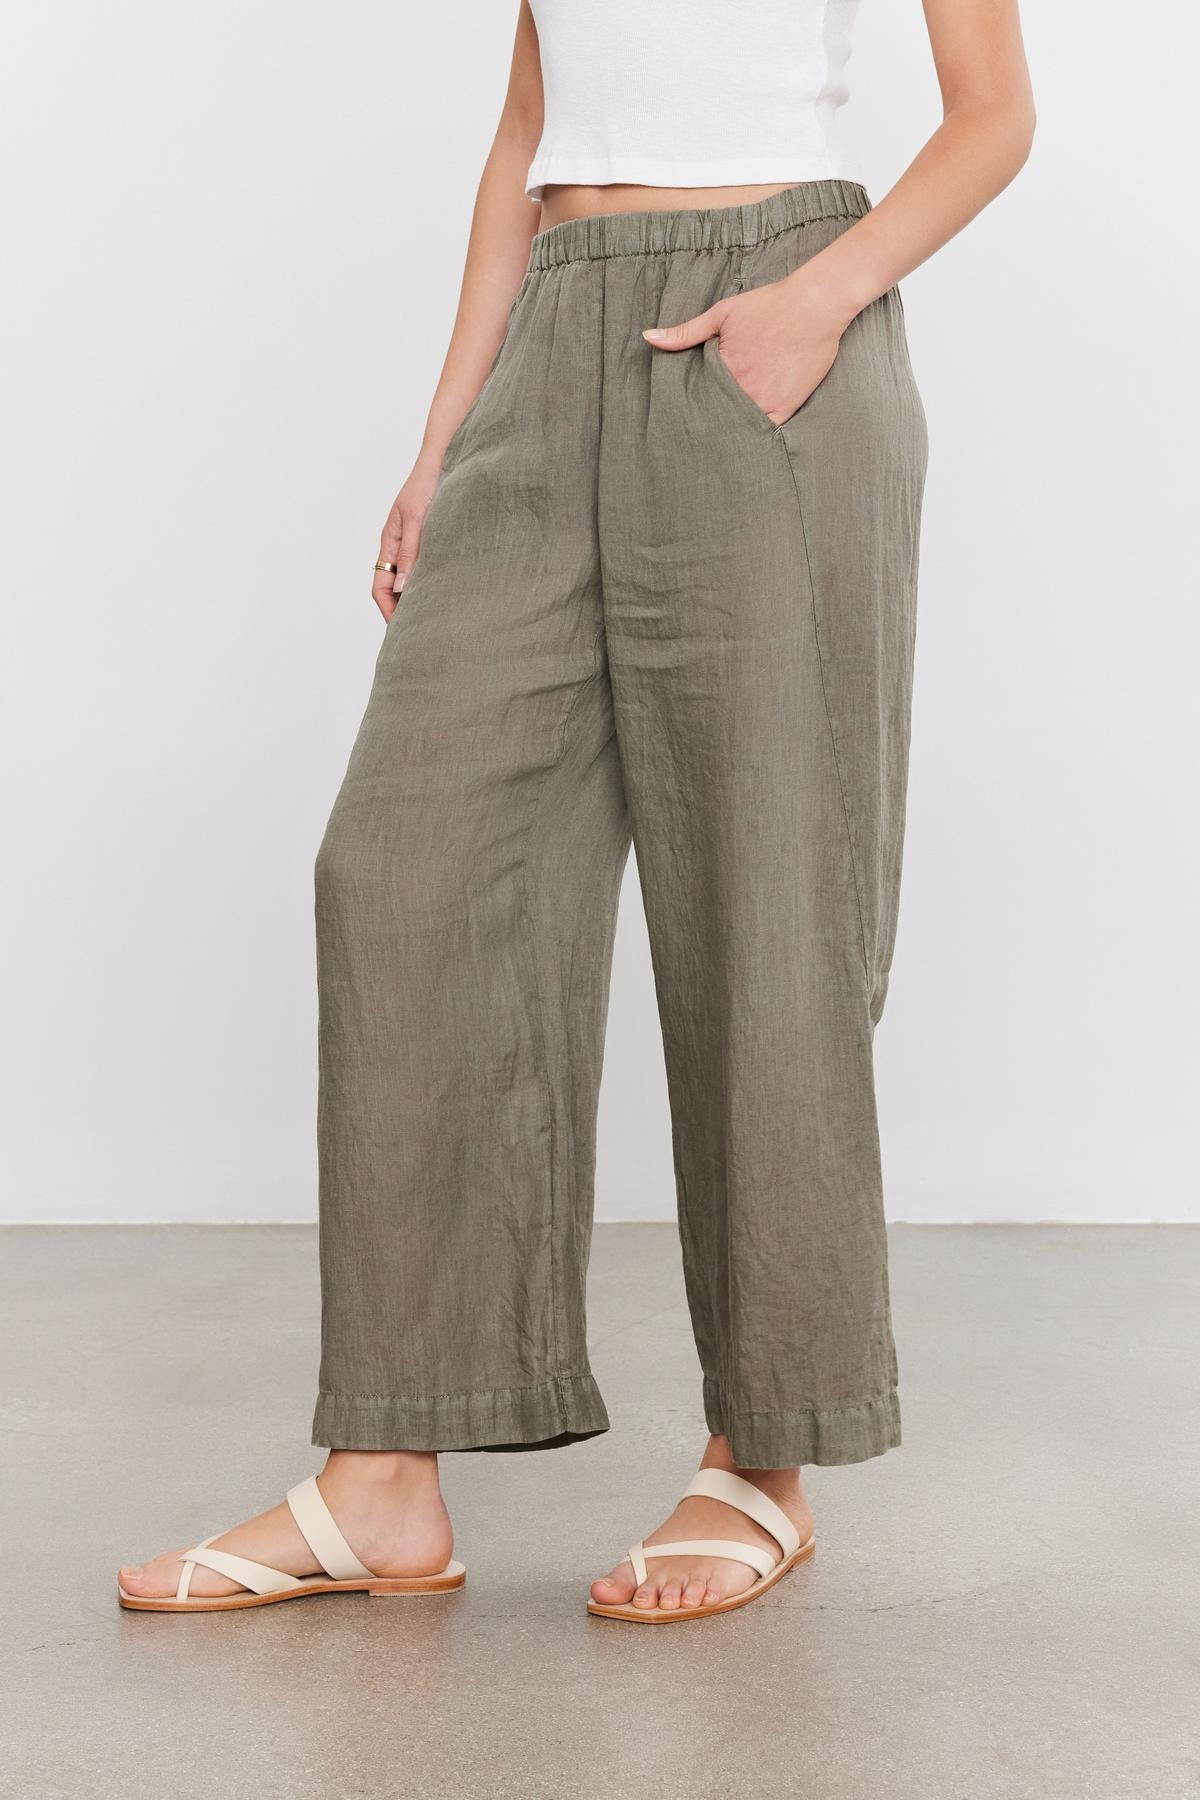   A person wearing olive green LOLA LINEN PANT by Velvet by Graham & Spencer with hands in pockets, a white crop top, and beige sandals. 